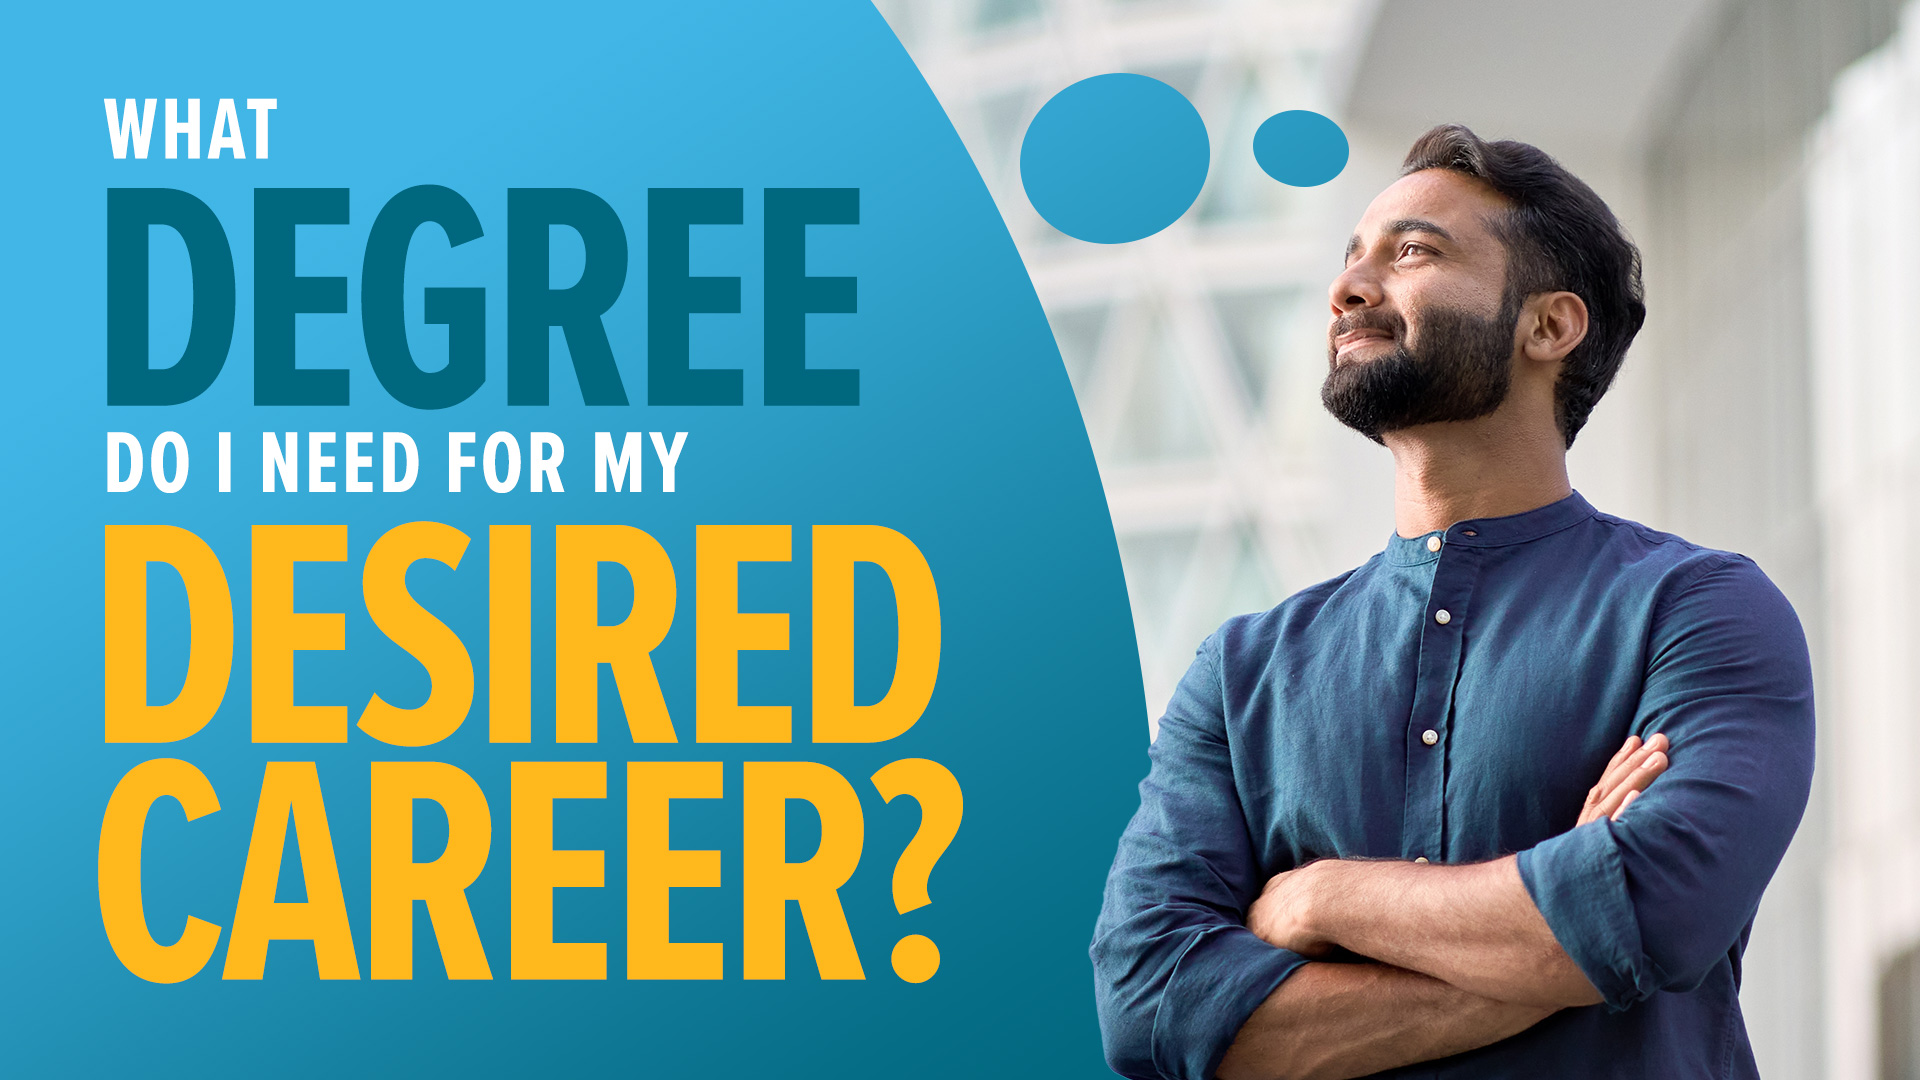 What Degree Do I Need for My Desired Career?